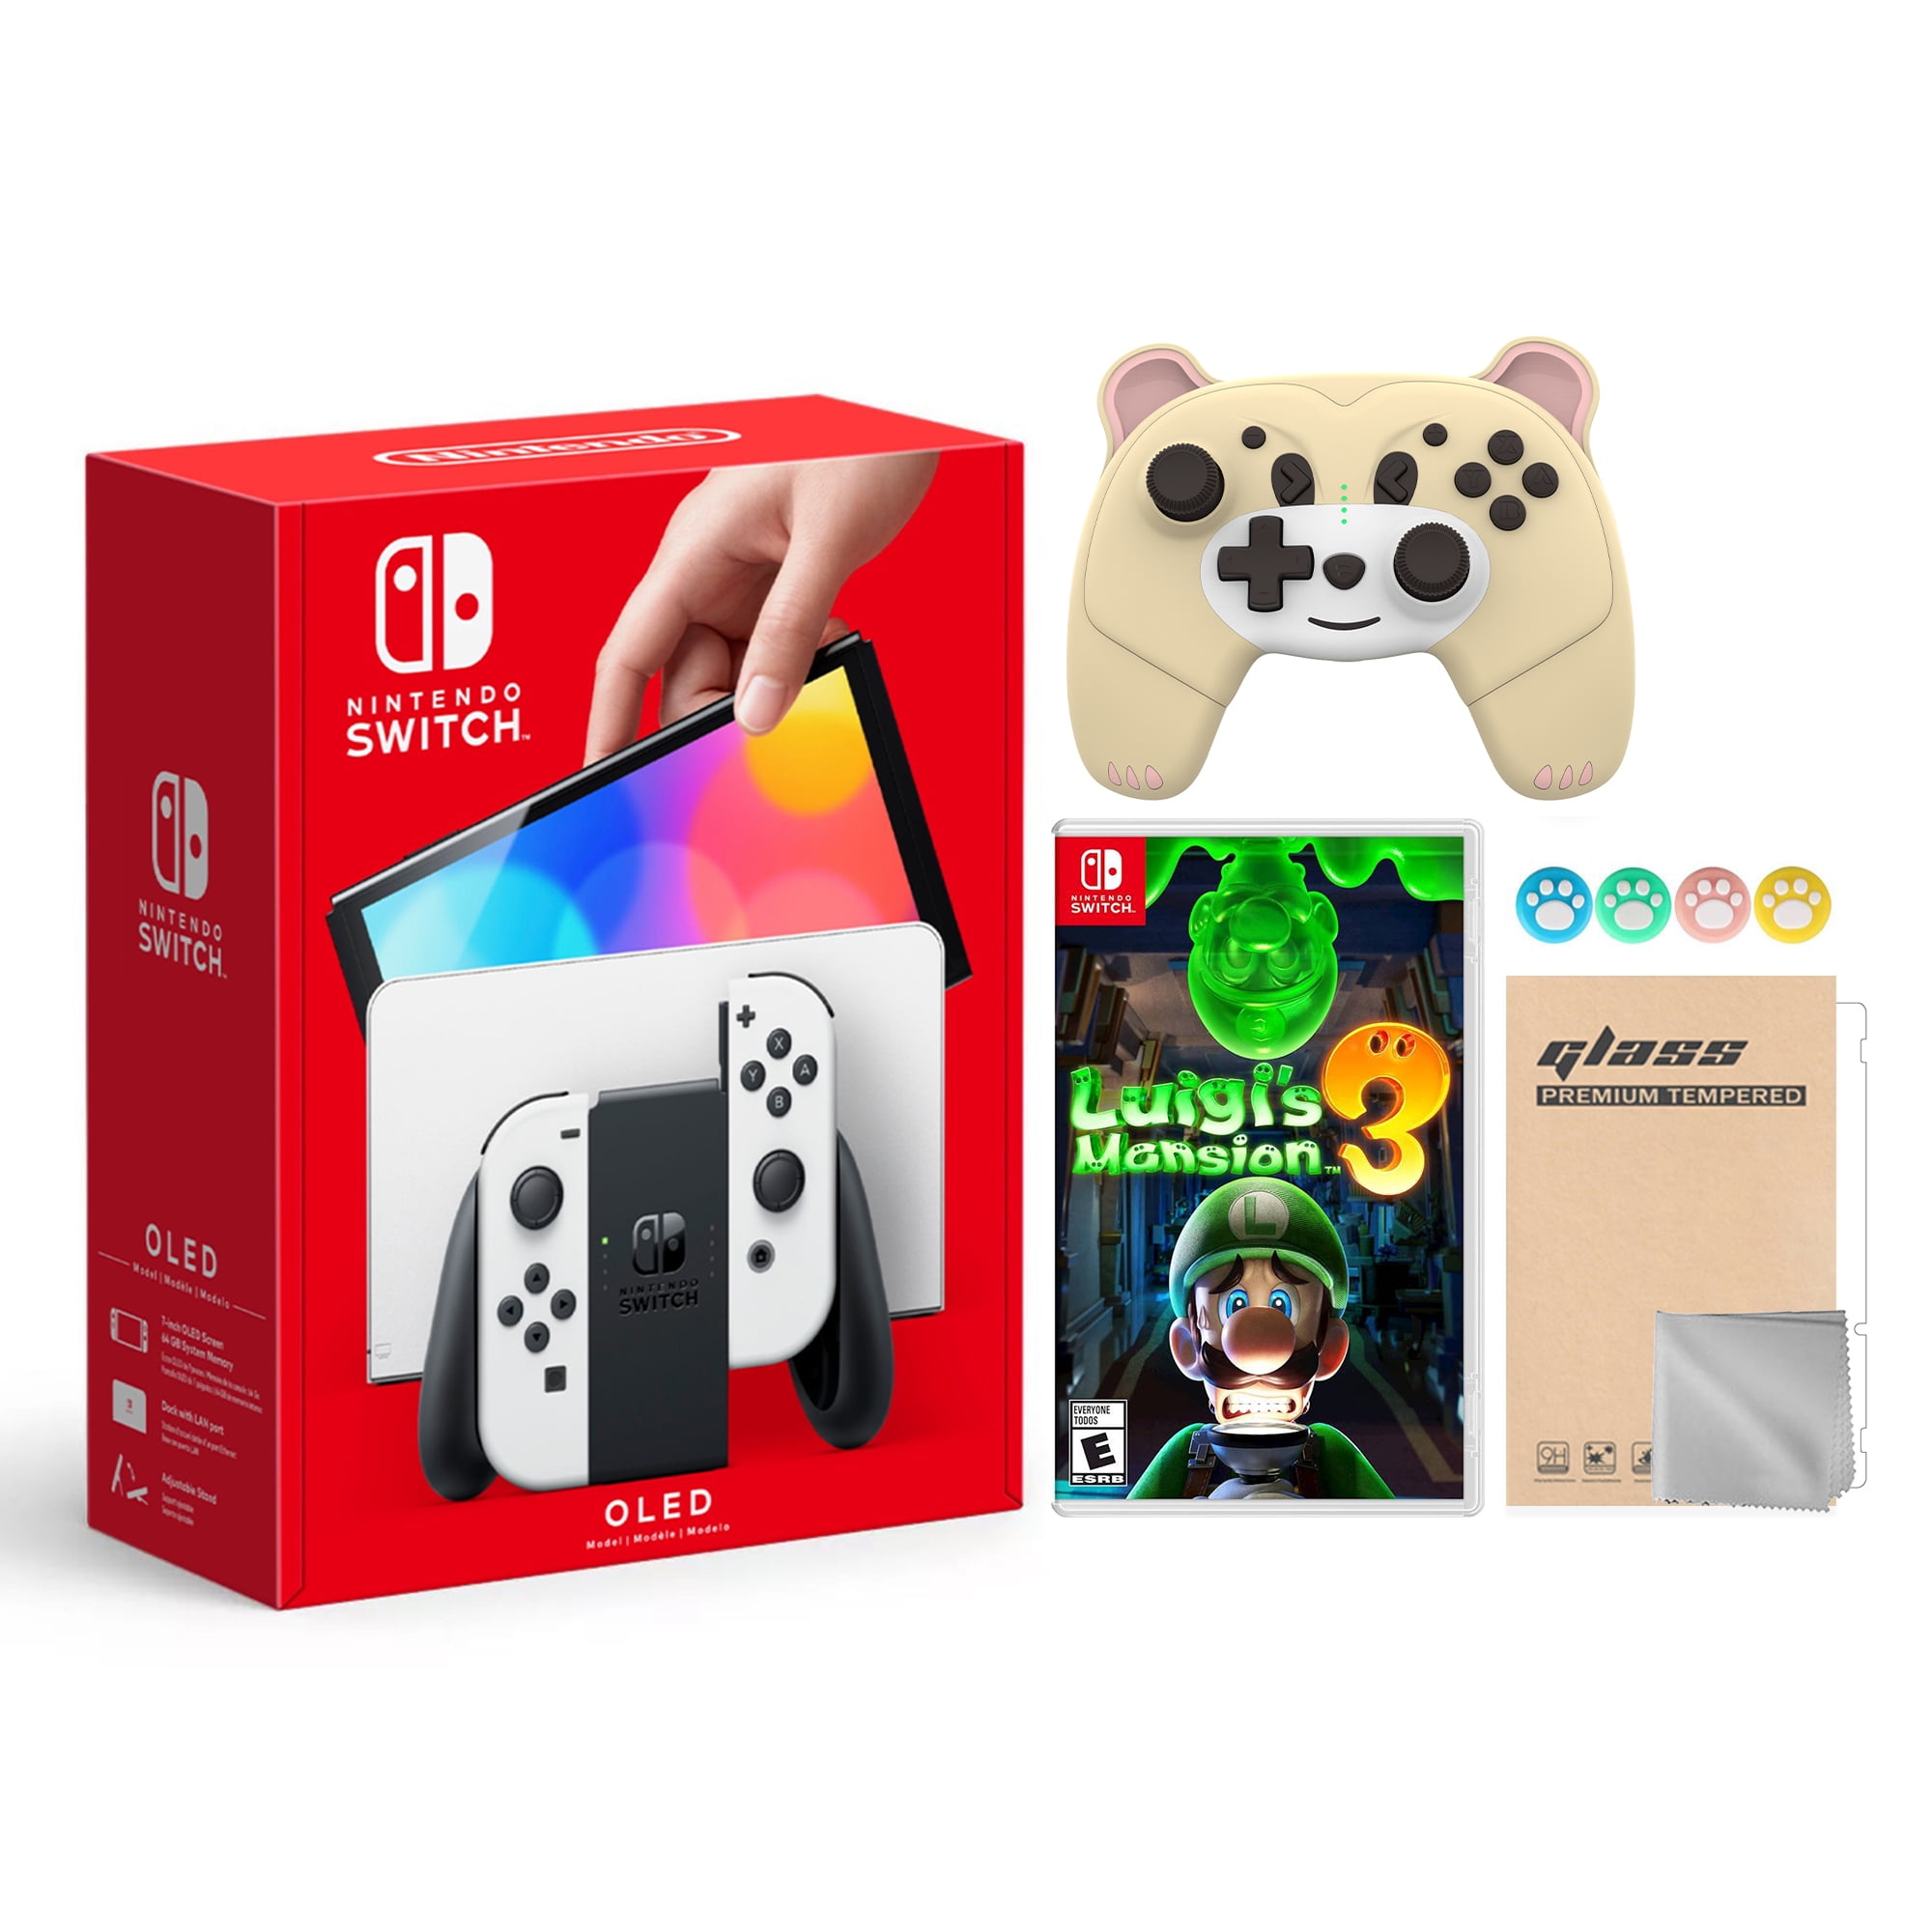 Nintendo Switch OLED Model White Joy Con 64GB Console Improved HD Screen  and LAN-Port Dock with Super Mario 3D World + Bowser's Fury And Mytrix  Wireless Pro Controller and Accessories 2021 New 